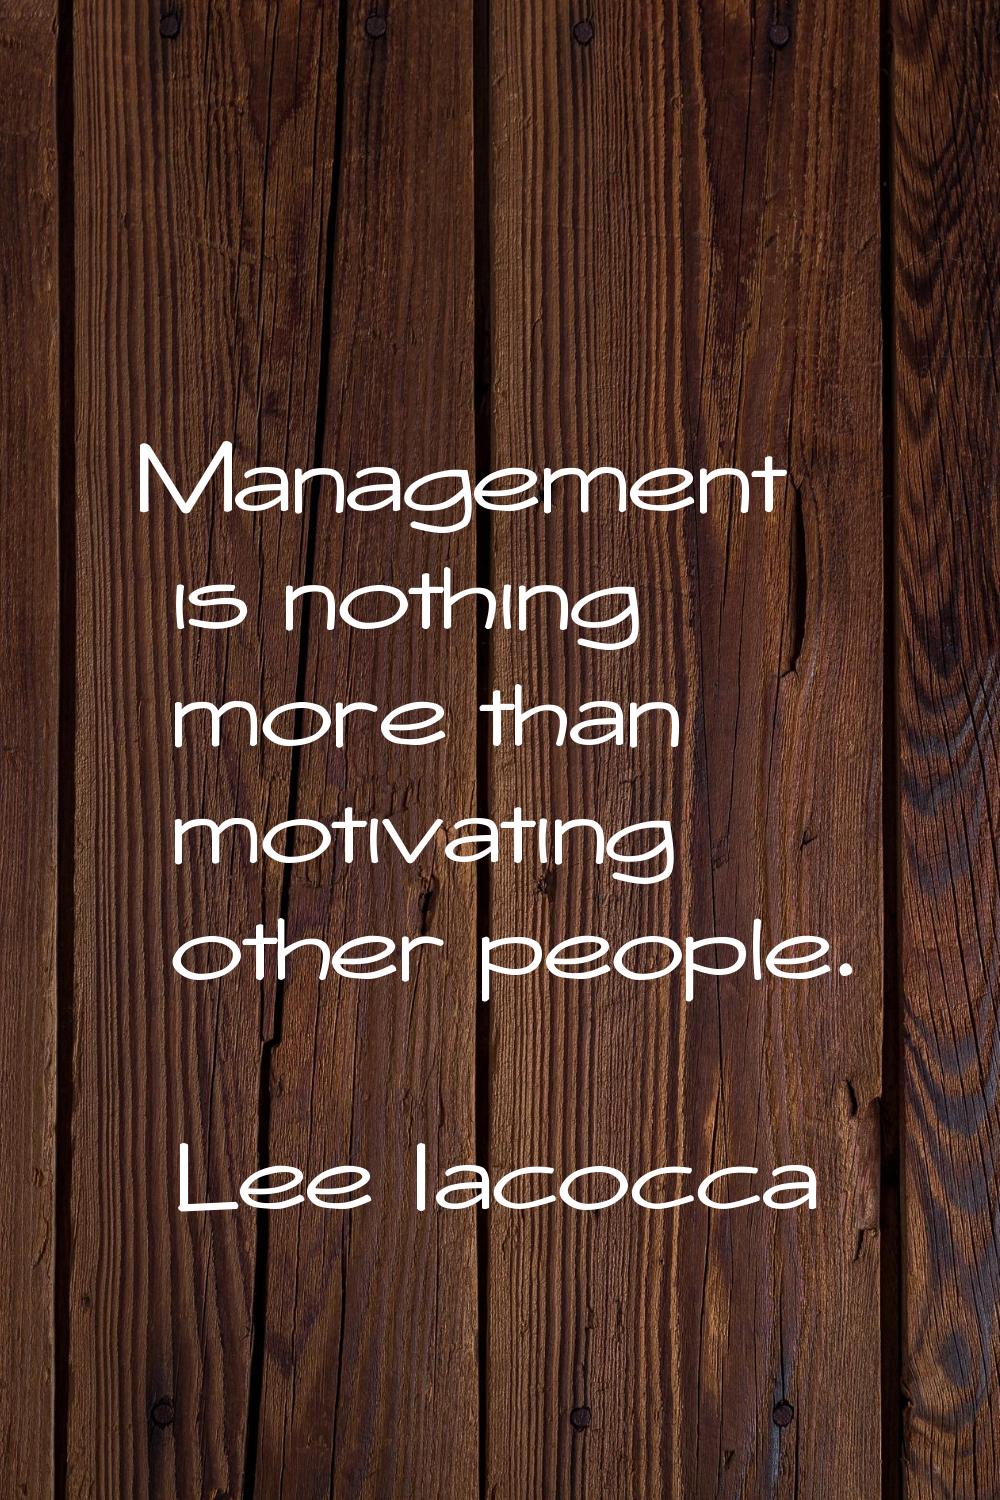 Management is nothing more than motivating other people.